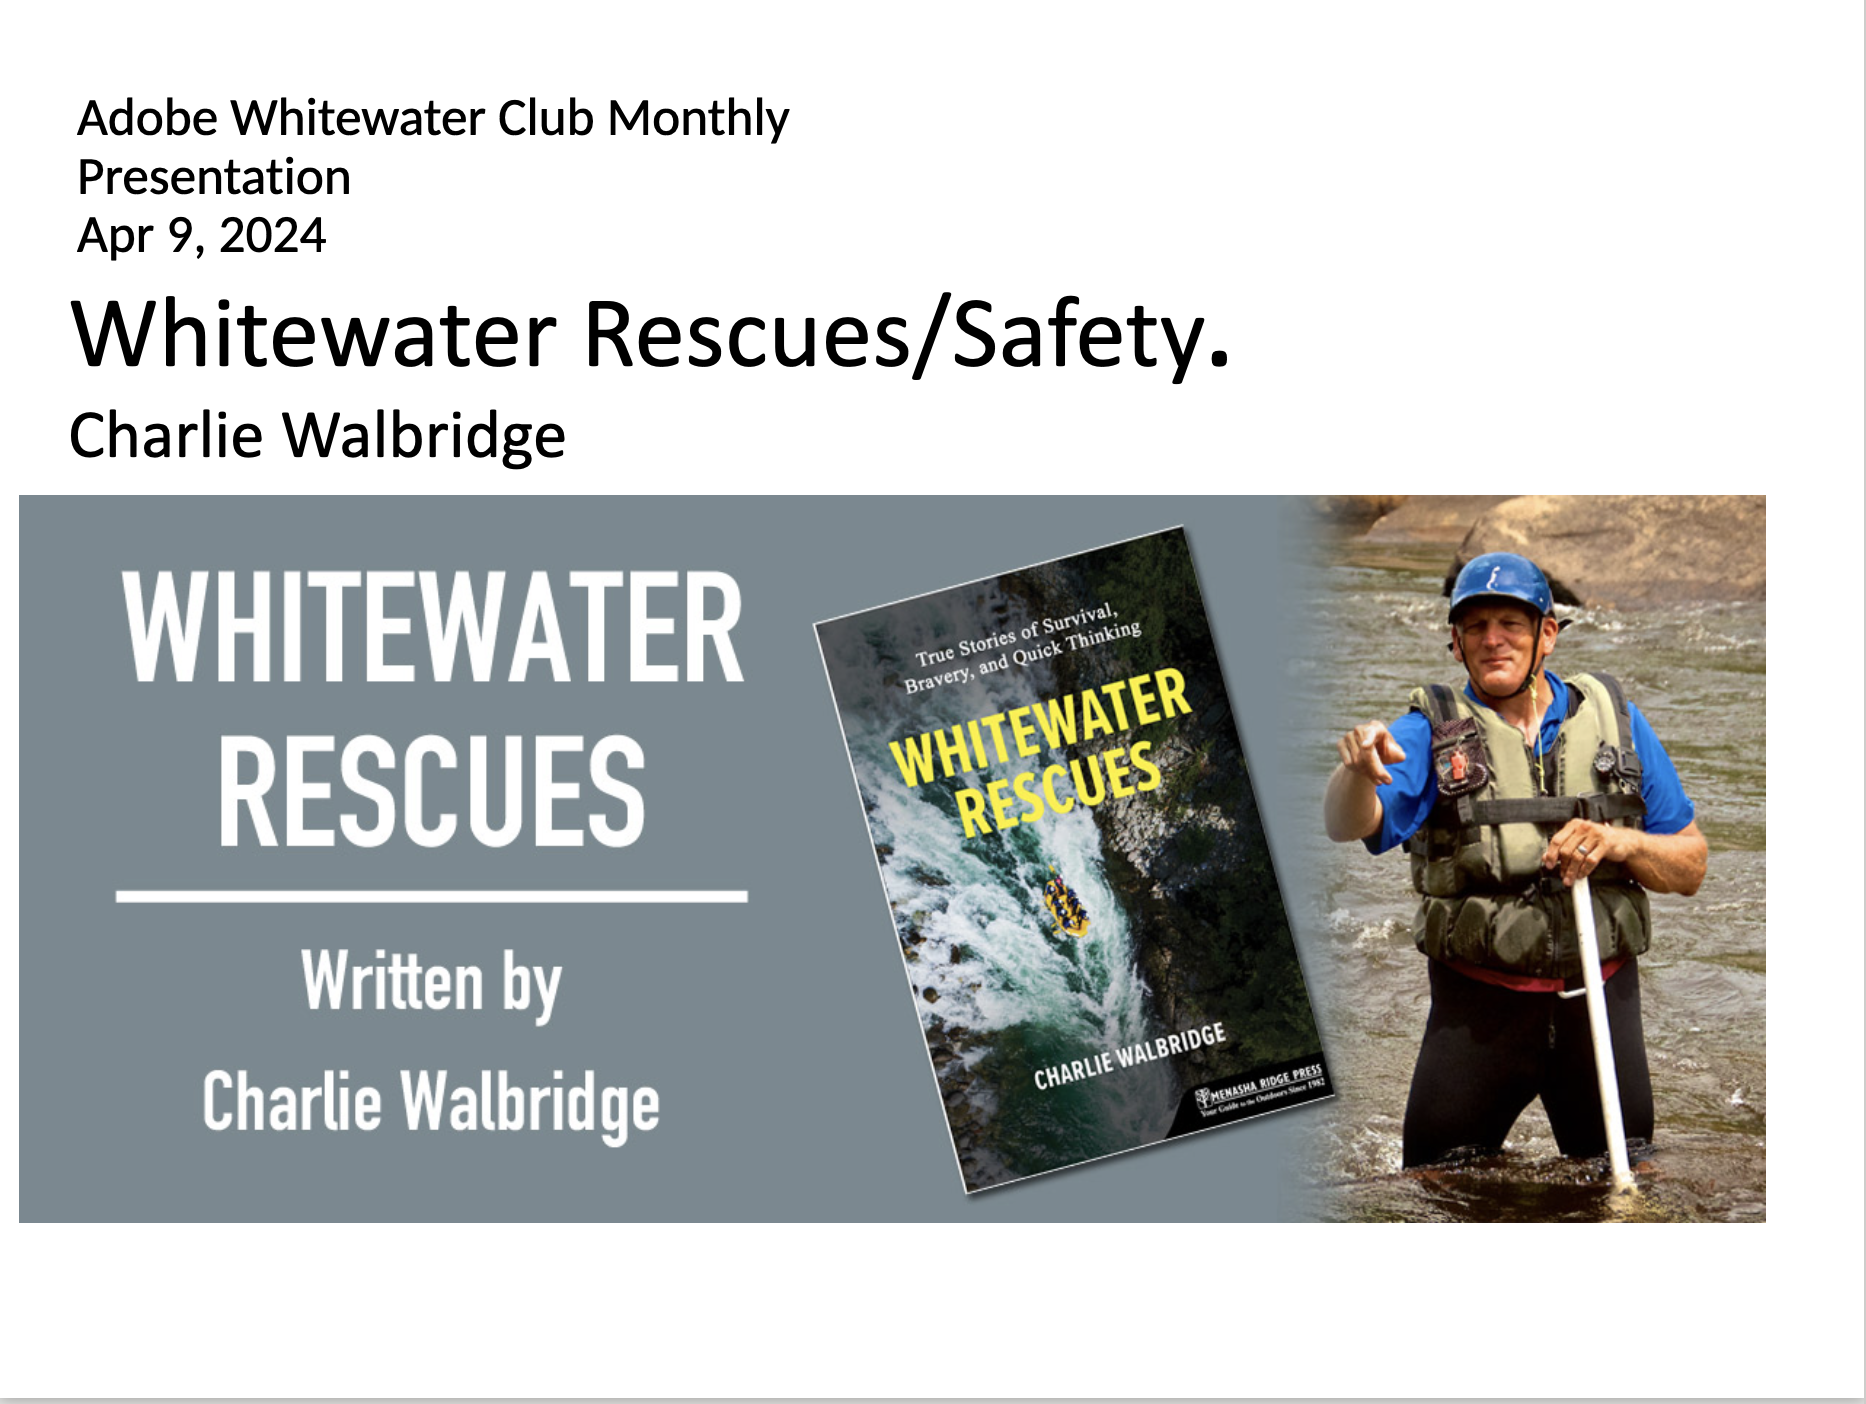 Whitewater Rescues/Safety by Charlie Walbridge